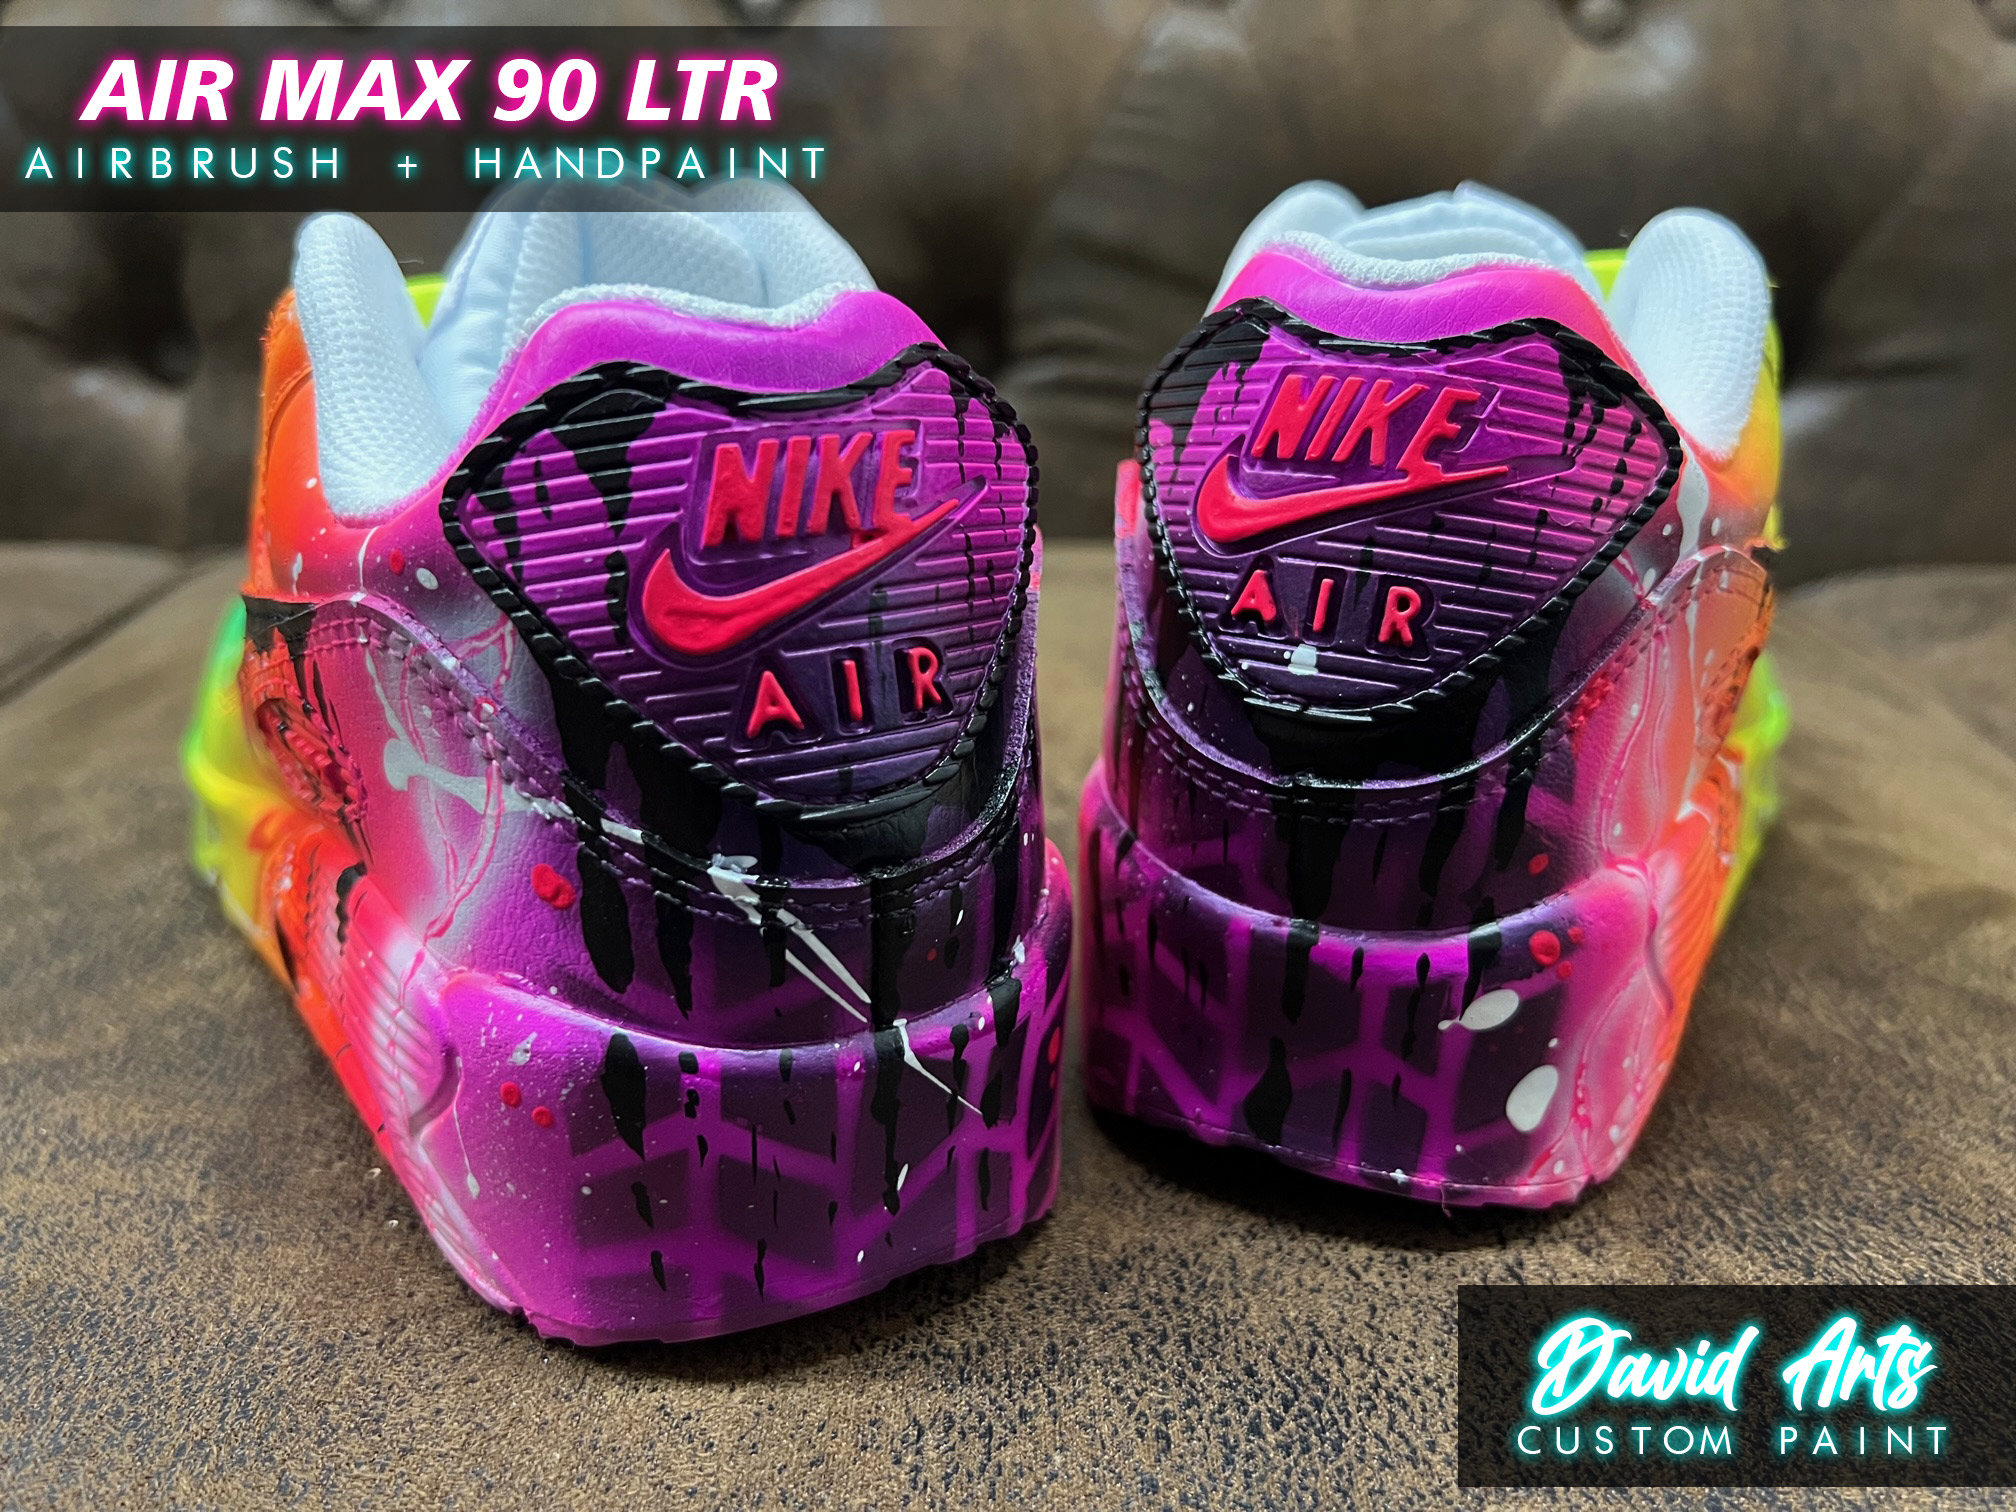 Air Max 90 LTR Customized Sneakers Airbrushed Handpainted 